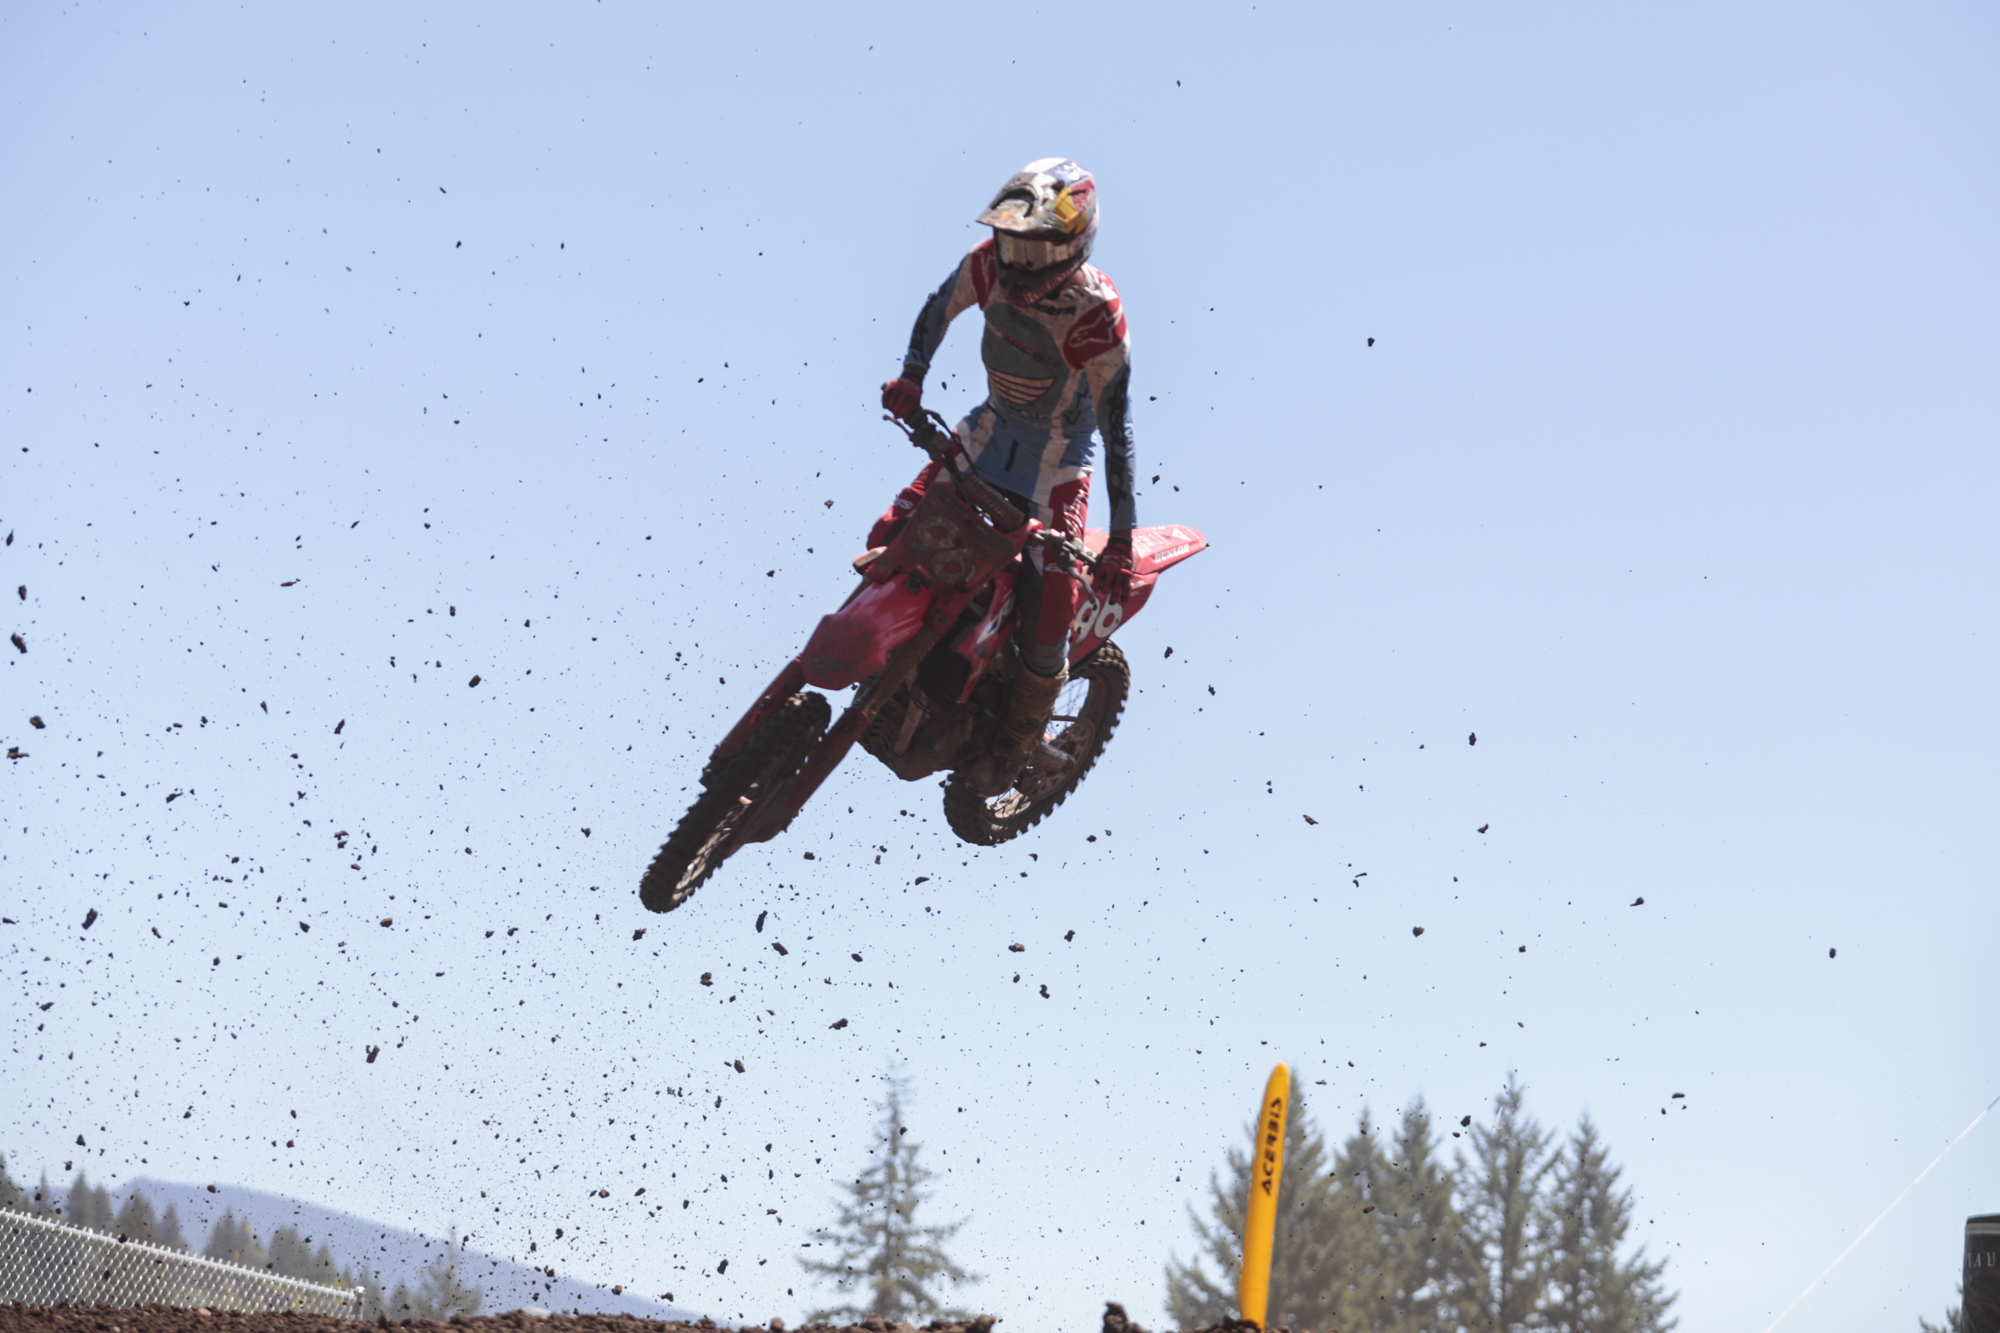 Hunter Lawrence takes a jump in the 250 Class Moto 1 at the 42nd annual Washougal National motocross race at Washougal MX Park on Saturday, July 22, 2023.